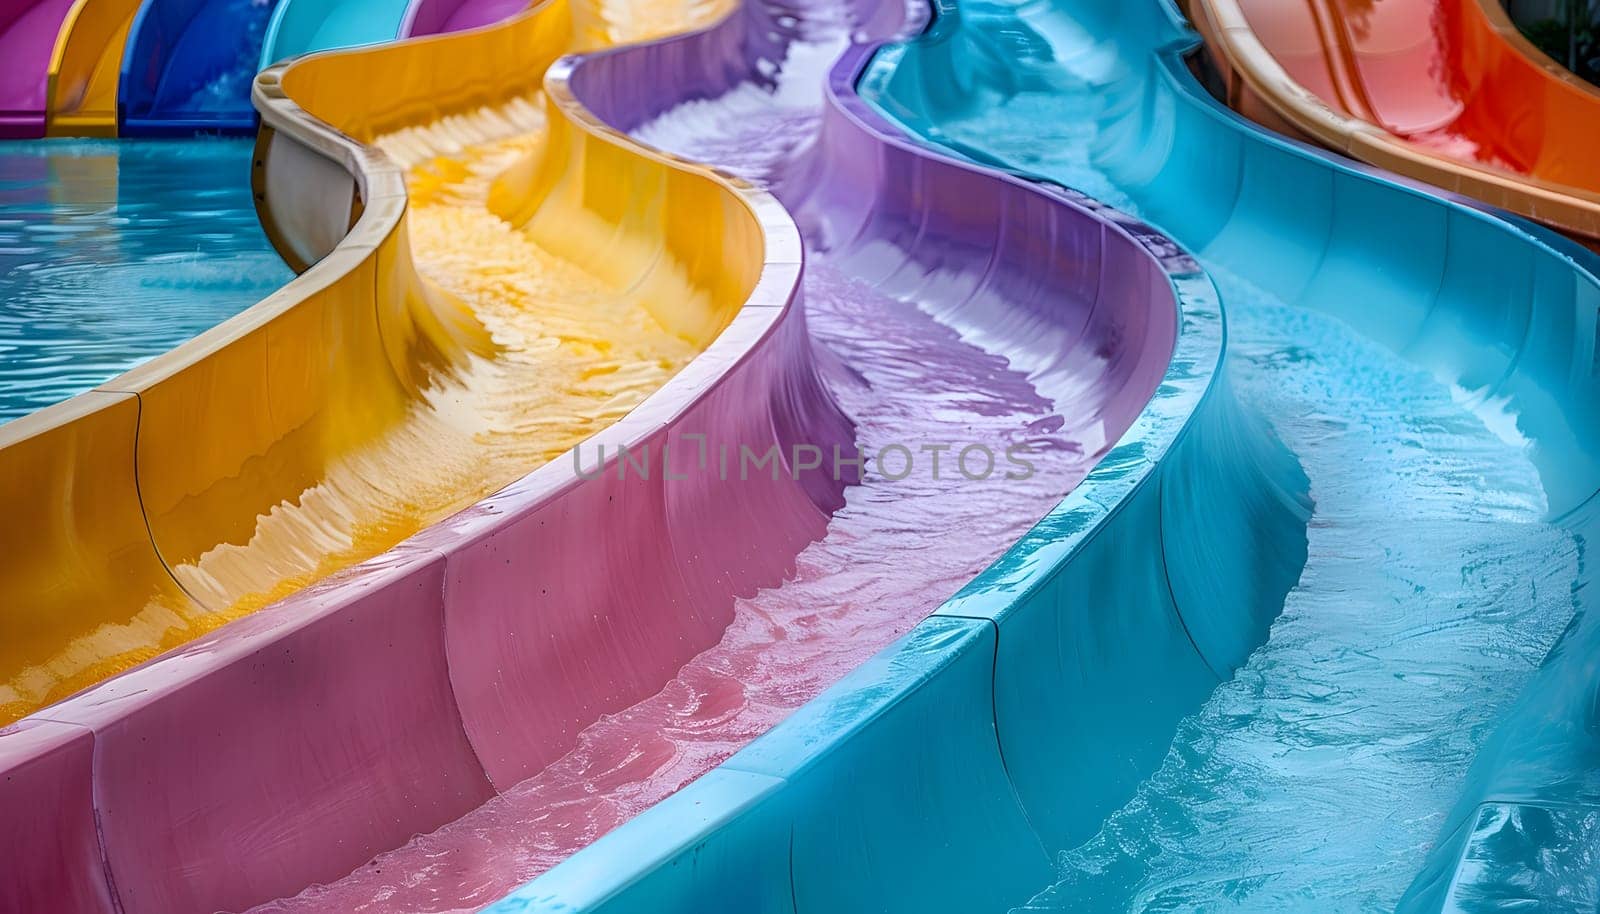 A vibrant row of water slides at the water park provides a thrilling experience for leisure and recreation, with hues of magenta and electric blue creating a festive and fun atmosphere